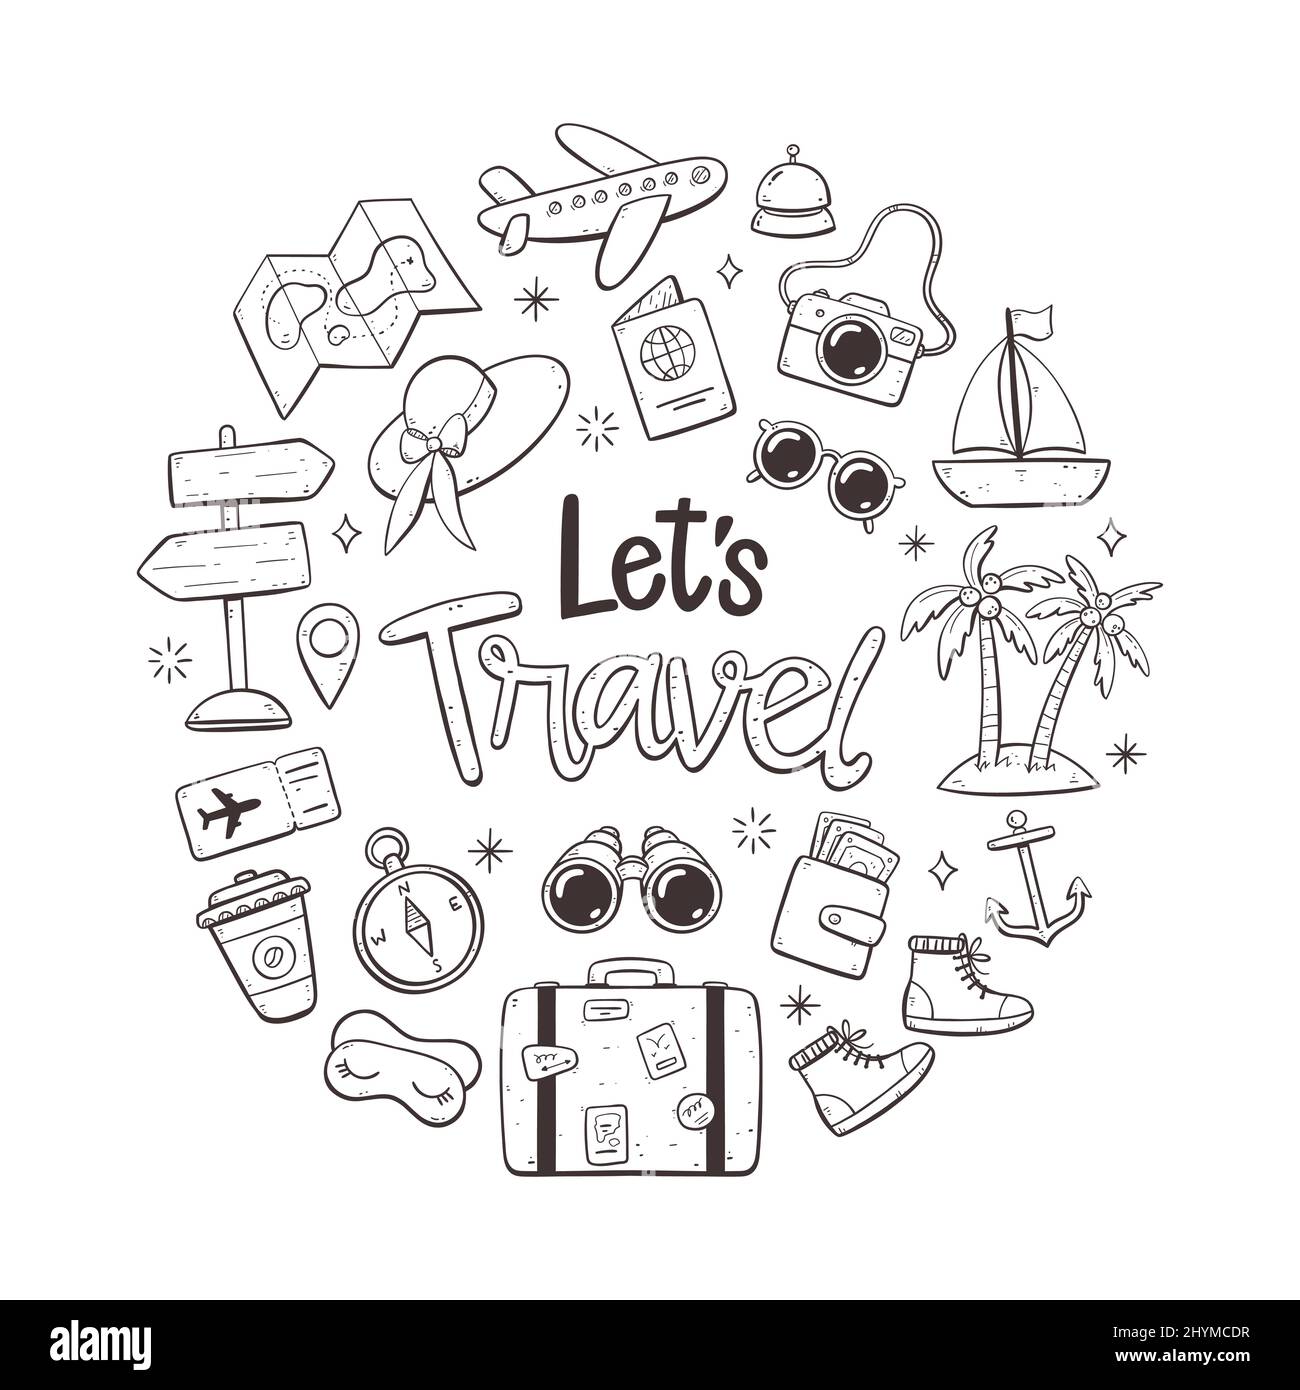 Travel holidays background. Doodle style. Cute hand drawn travel icons. Isolated objects on white background. Stock Vector